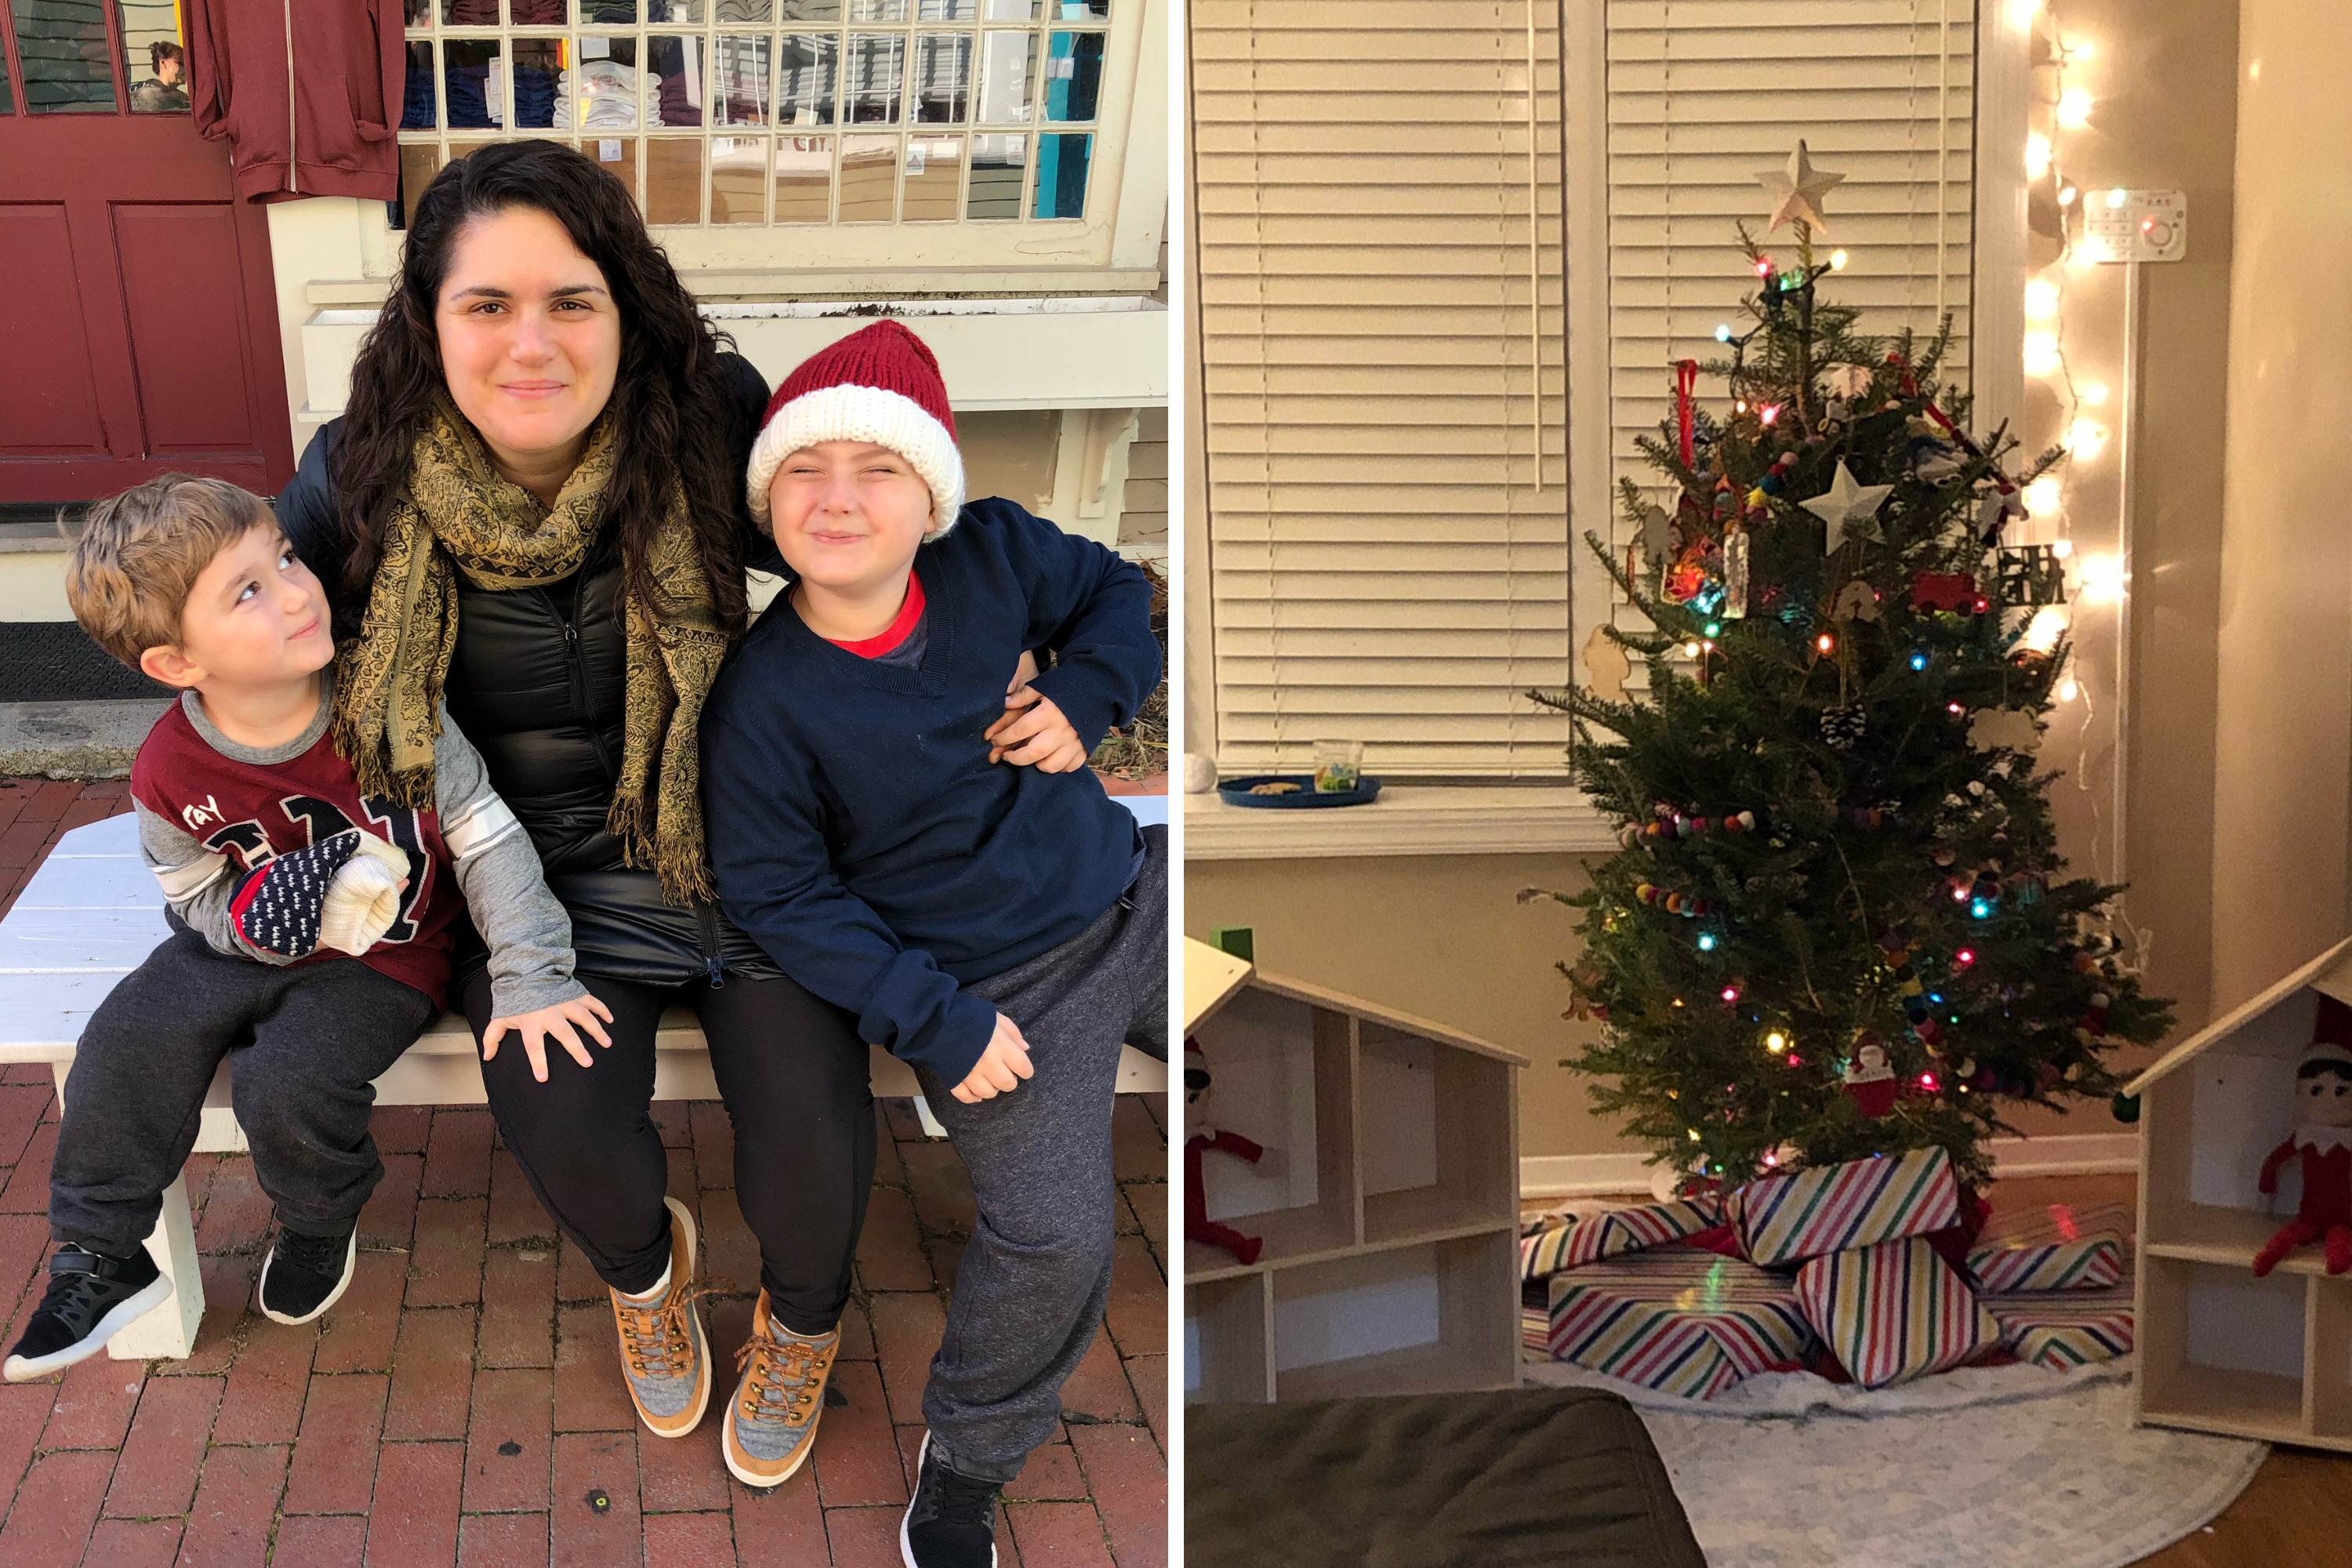 To The Single Mom At Christmas - Different By Design Learning